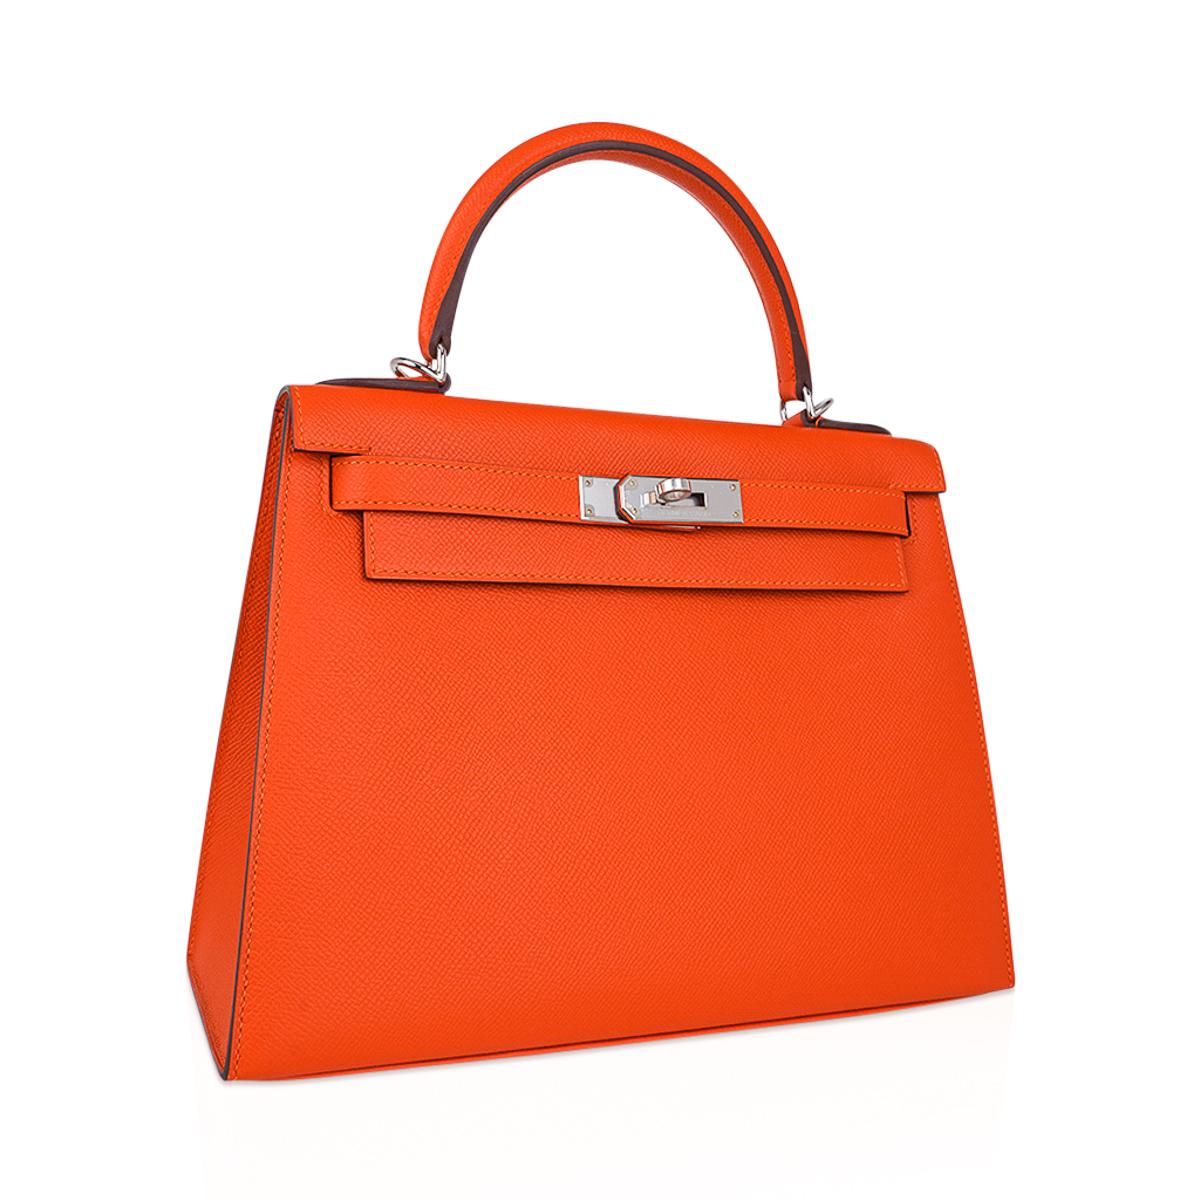 Mightychic offers an Hermes Kelly Sellier 28 bag featured in Feu.
This iconic Hermes Kelly Sellier orange bag is timeless and chic.
Epsom leather is frequently used for saturated colours as it elevates the best hues.
Fresh with palladium